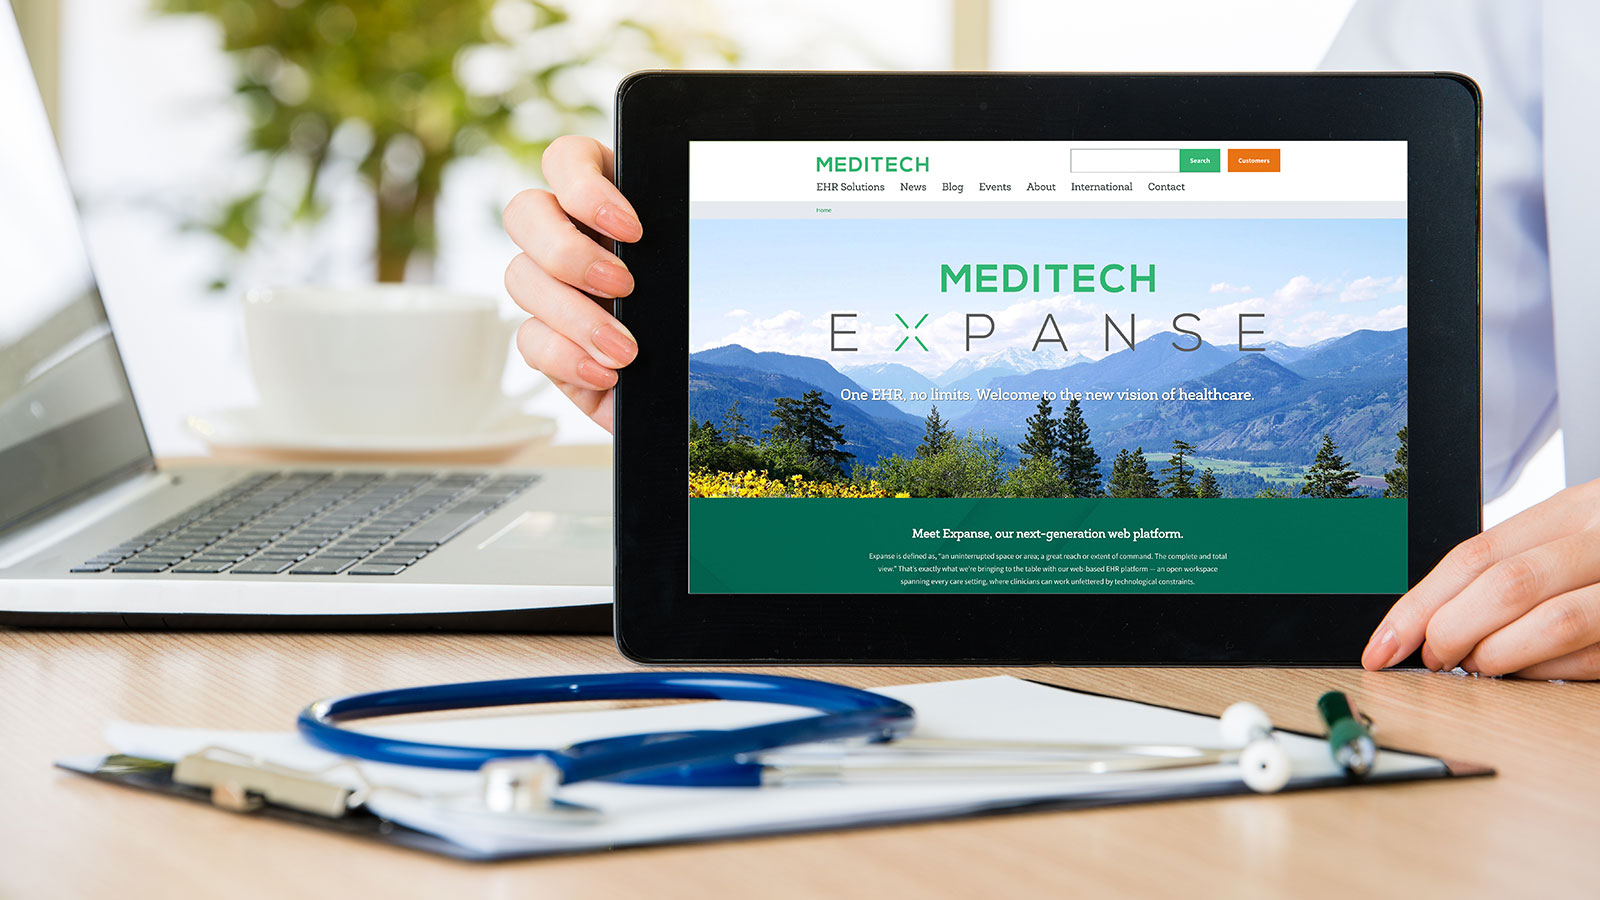 MediTech Expanse Brand Identity Consulting: Homepage on Tablet in Medical Setting